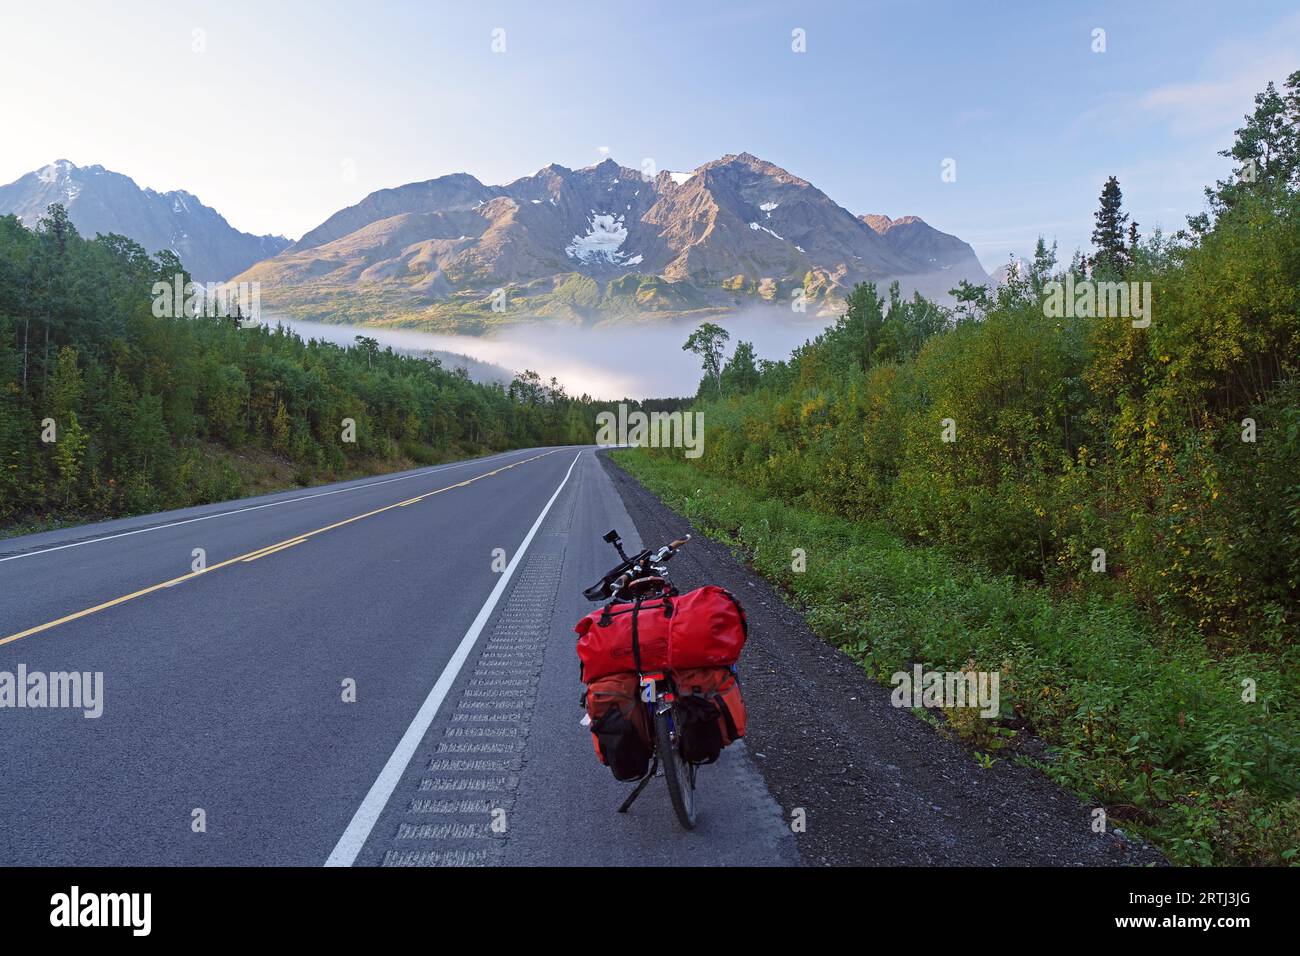 Bicycle on a straight, traffic-free road, fog, foliage colouring and snow-covered mountains, Richardson Highway, Alakska, USA Stock Photo